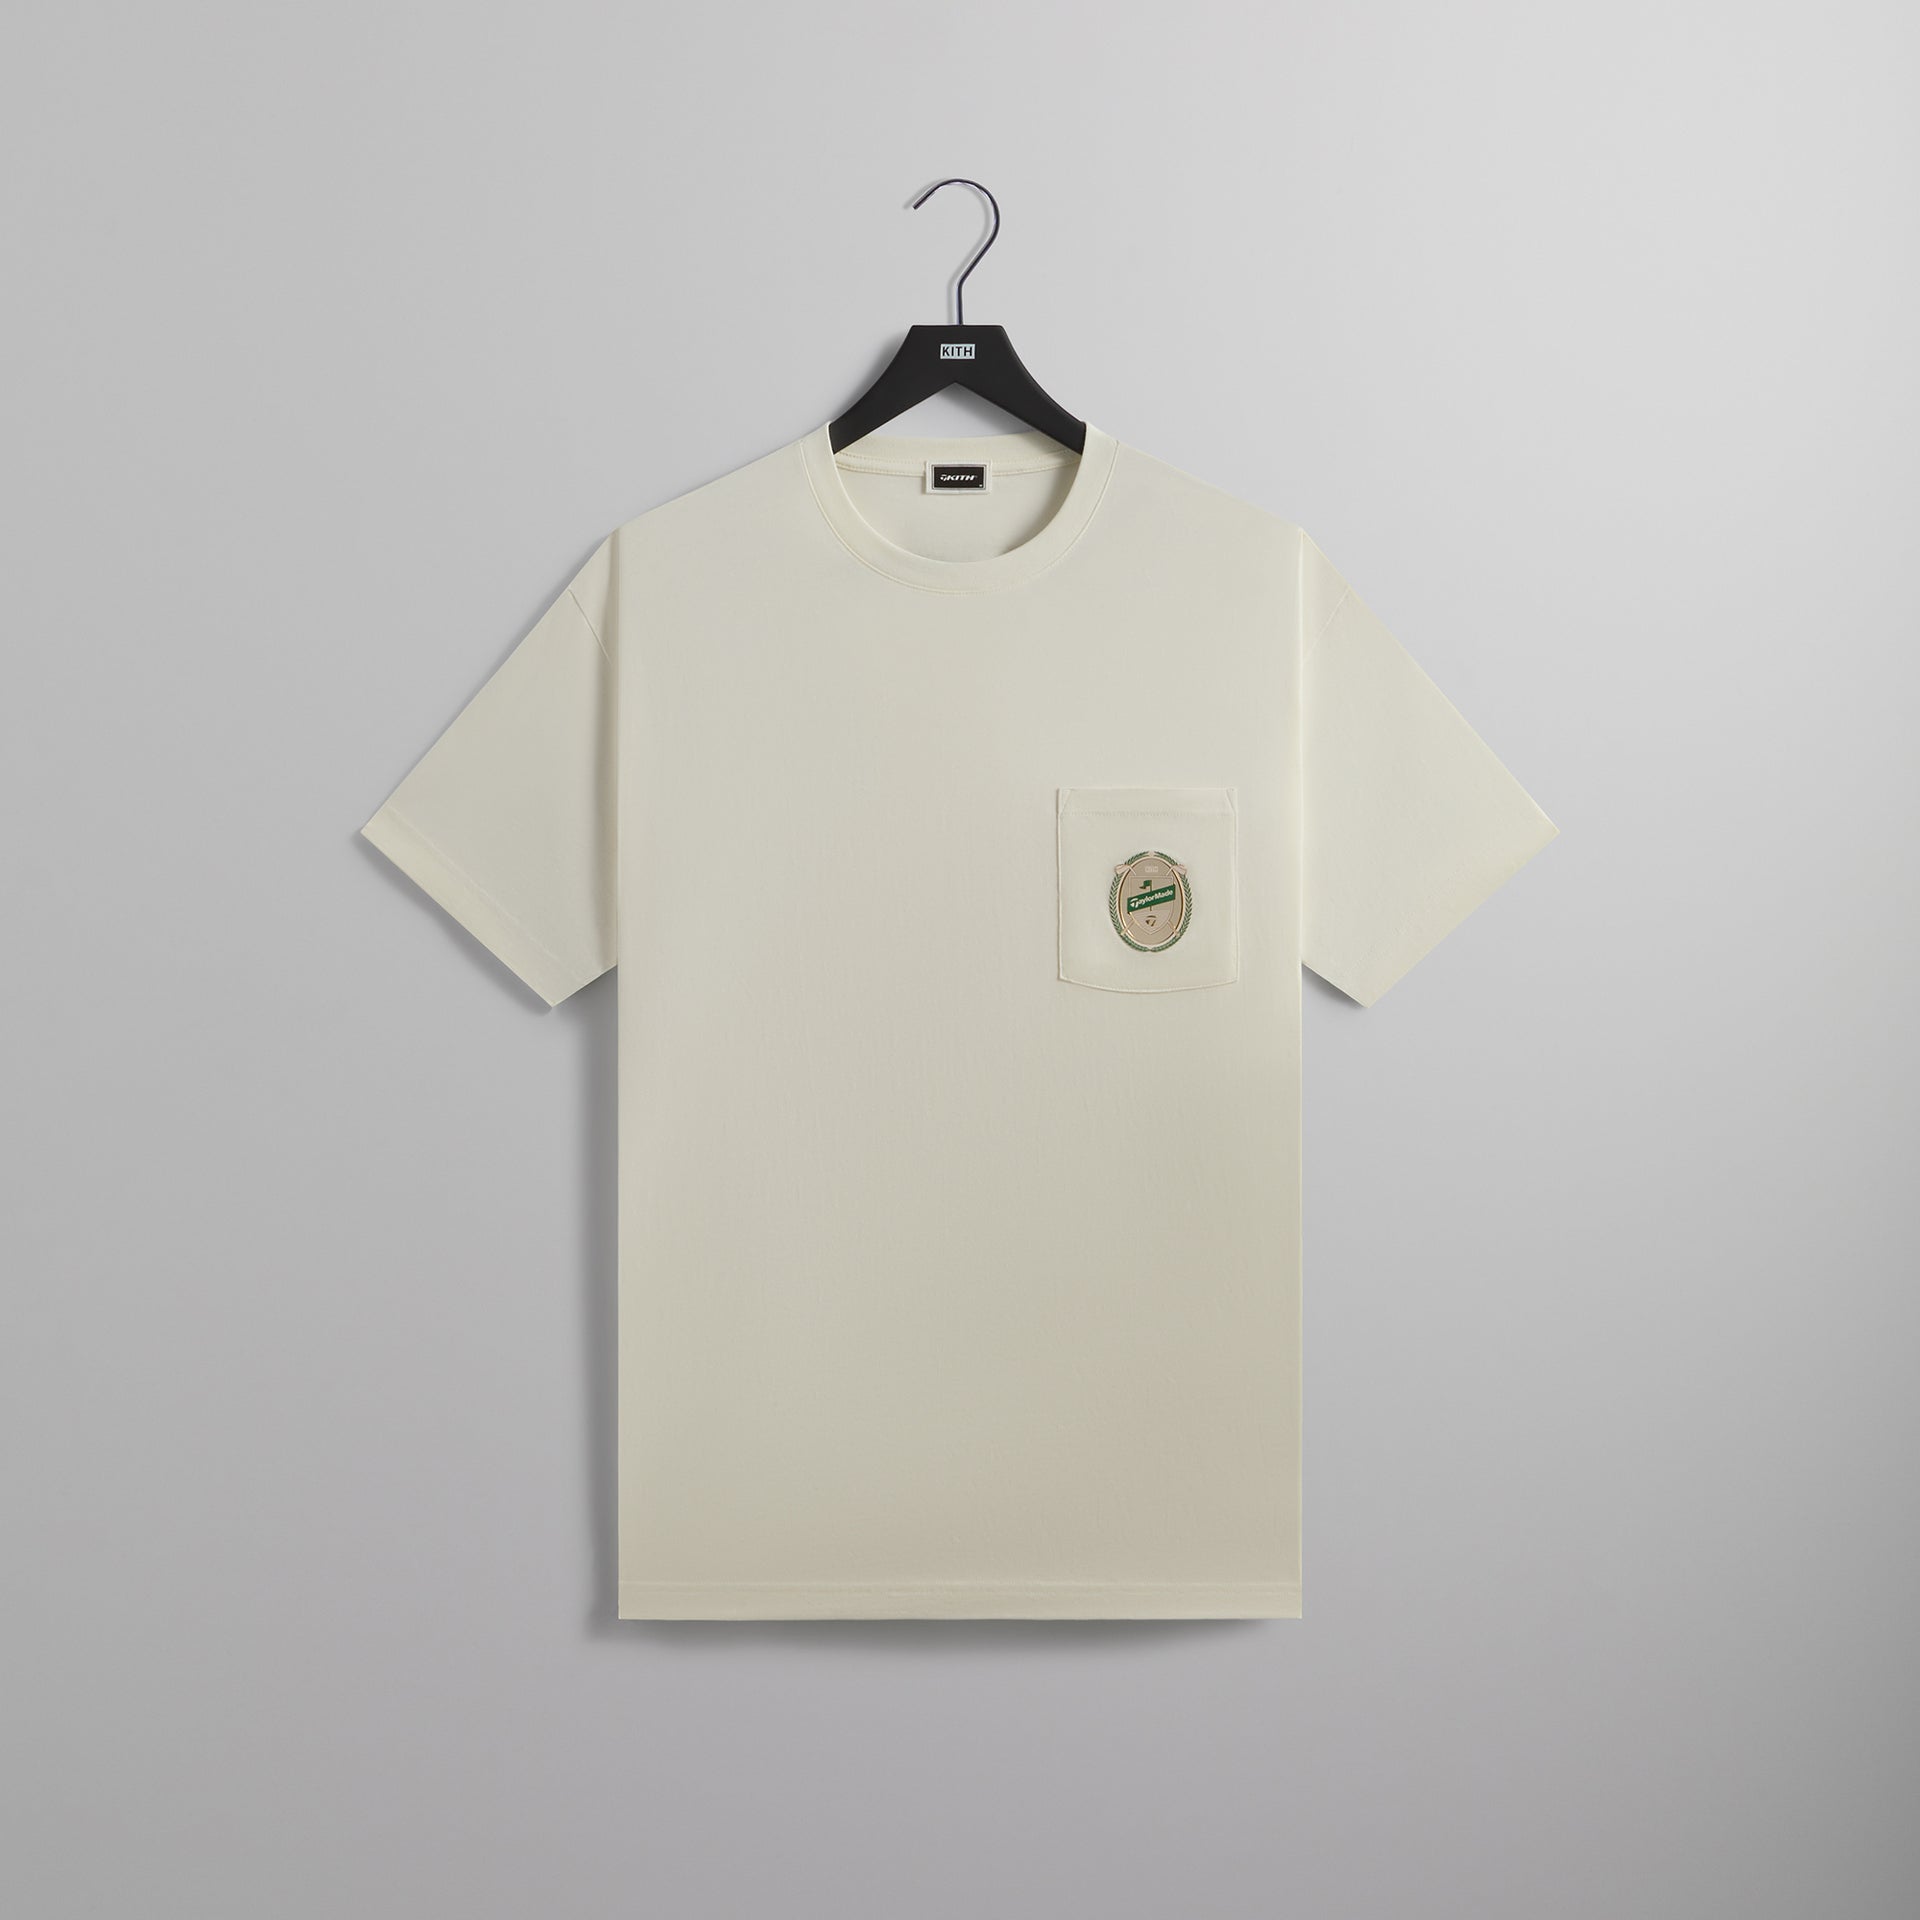 Kith for TaylorMade Crest Tee - Silk